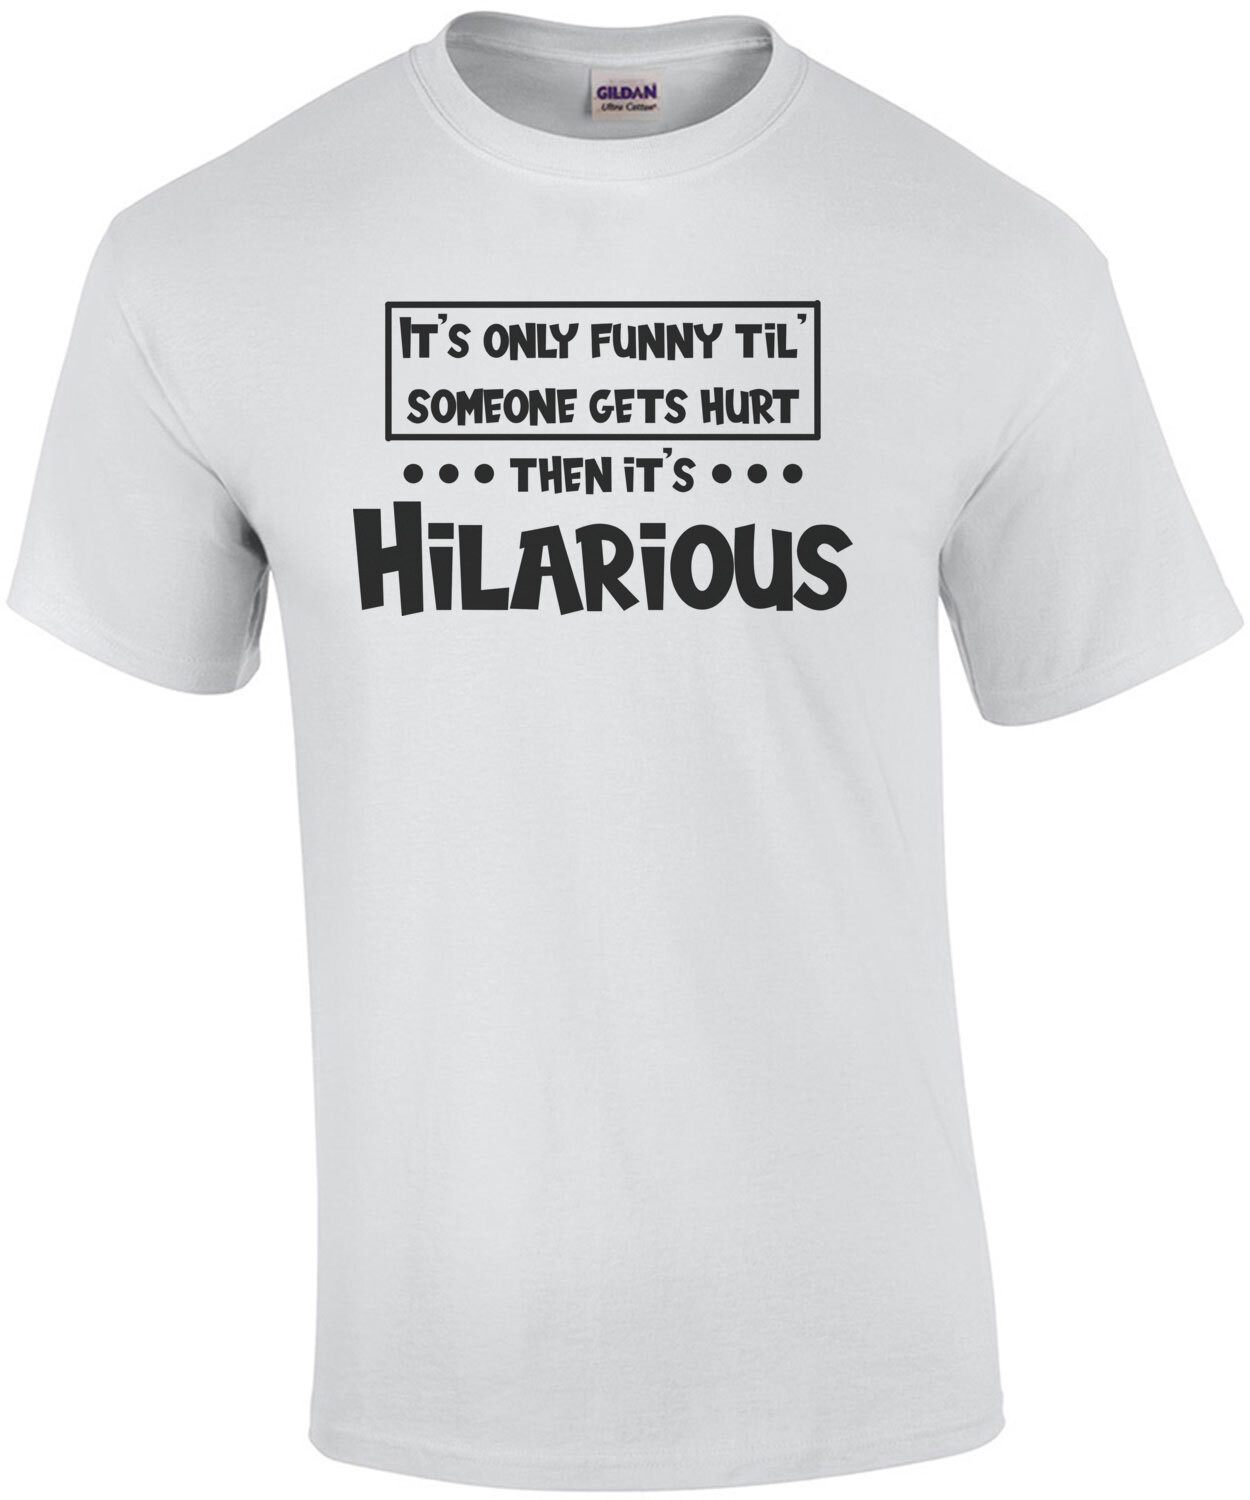 It's only funny 'til someone gets hurt... then it's hilarious. Shirt